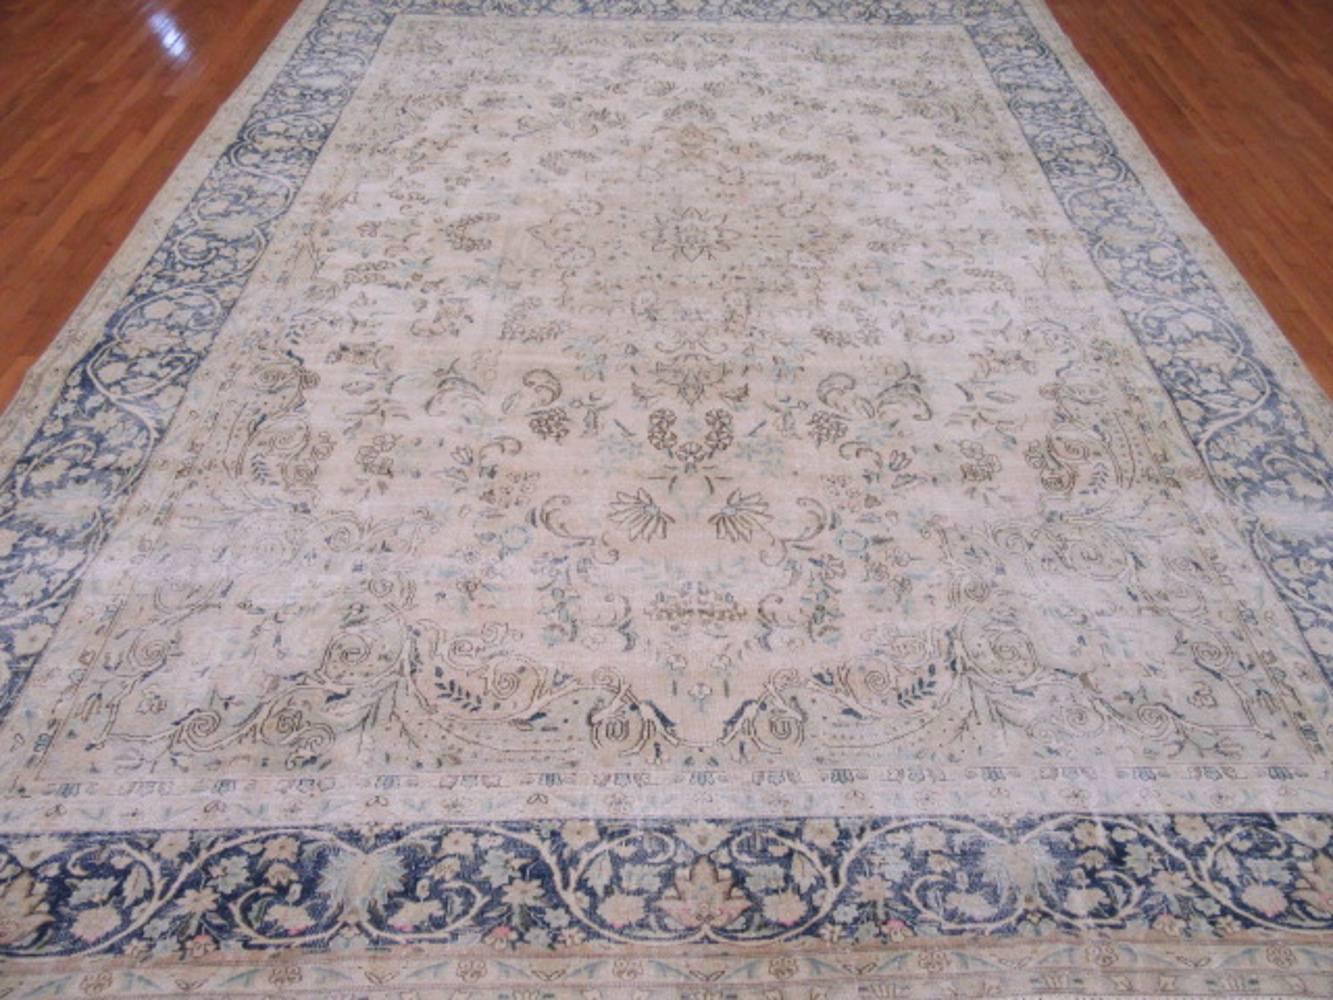 This is a beautiful hand-knotted distressed old Persian Kerman rug . It has the cool contemporary and popular colors mixed with a more traditional pattern creating a great transitional rug to work with. It measures 9' 9'' x 13' 1'' and in good shape.